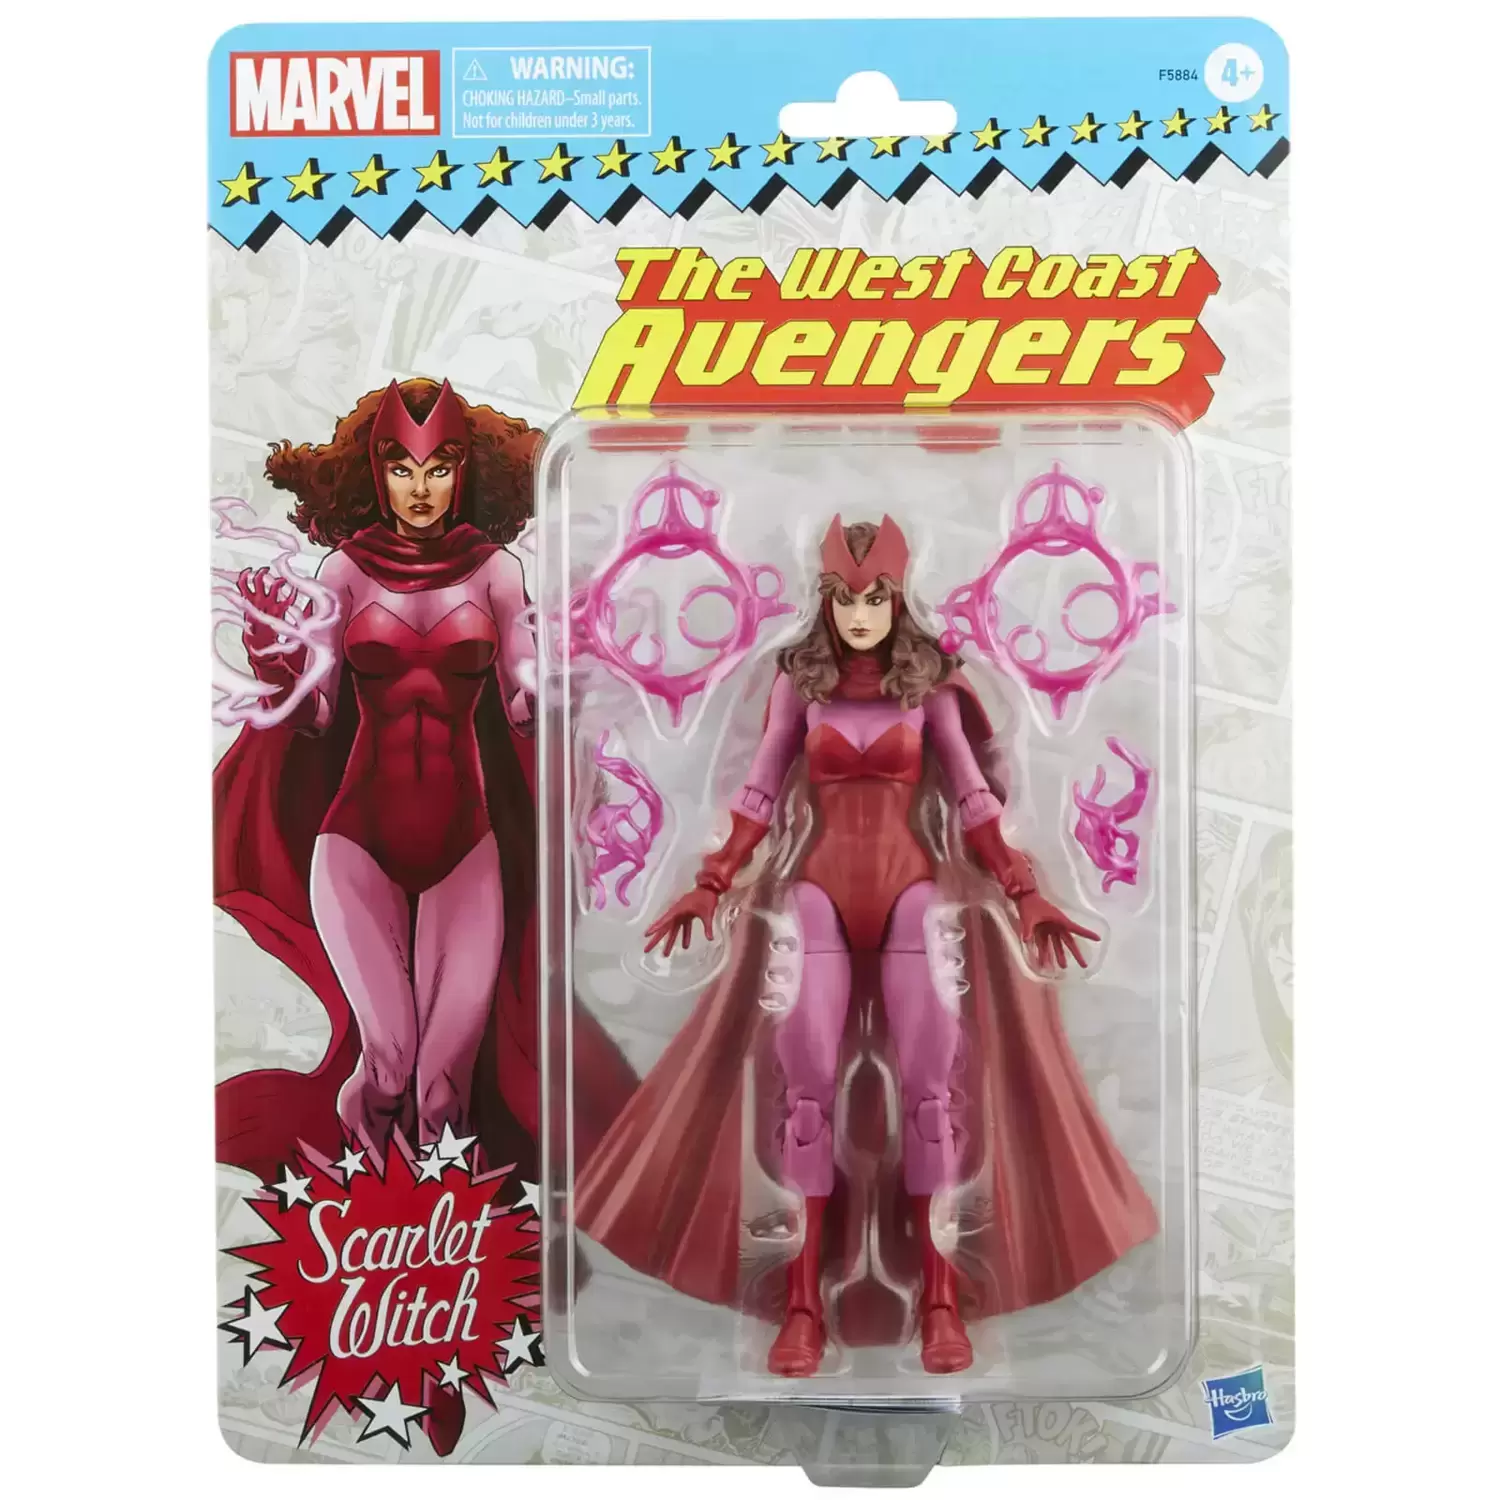 Marvel Retro Collection - Scarlet Witch - The West Coast Avengers